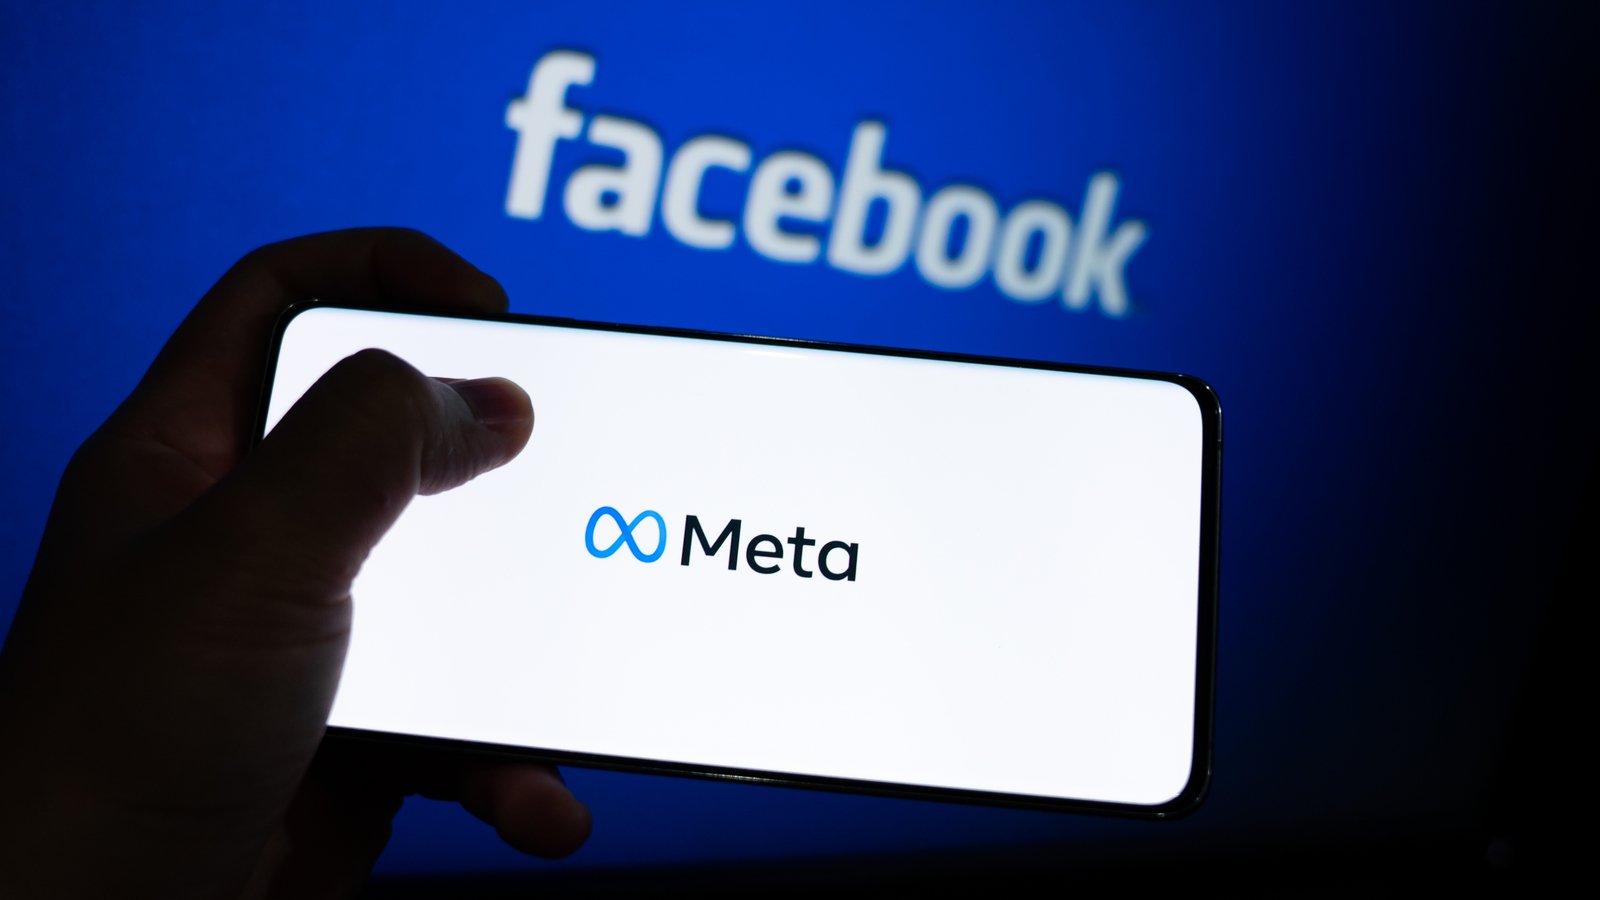 Meta layoffs. META stock logo is shown on a device screen. Meta is the new corporate name of Facebook.